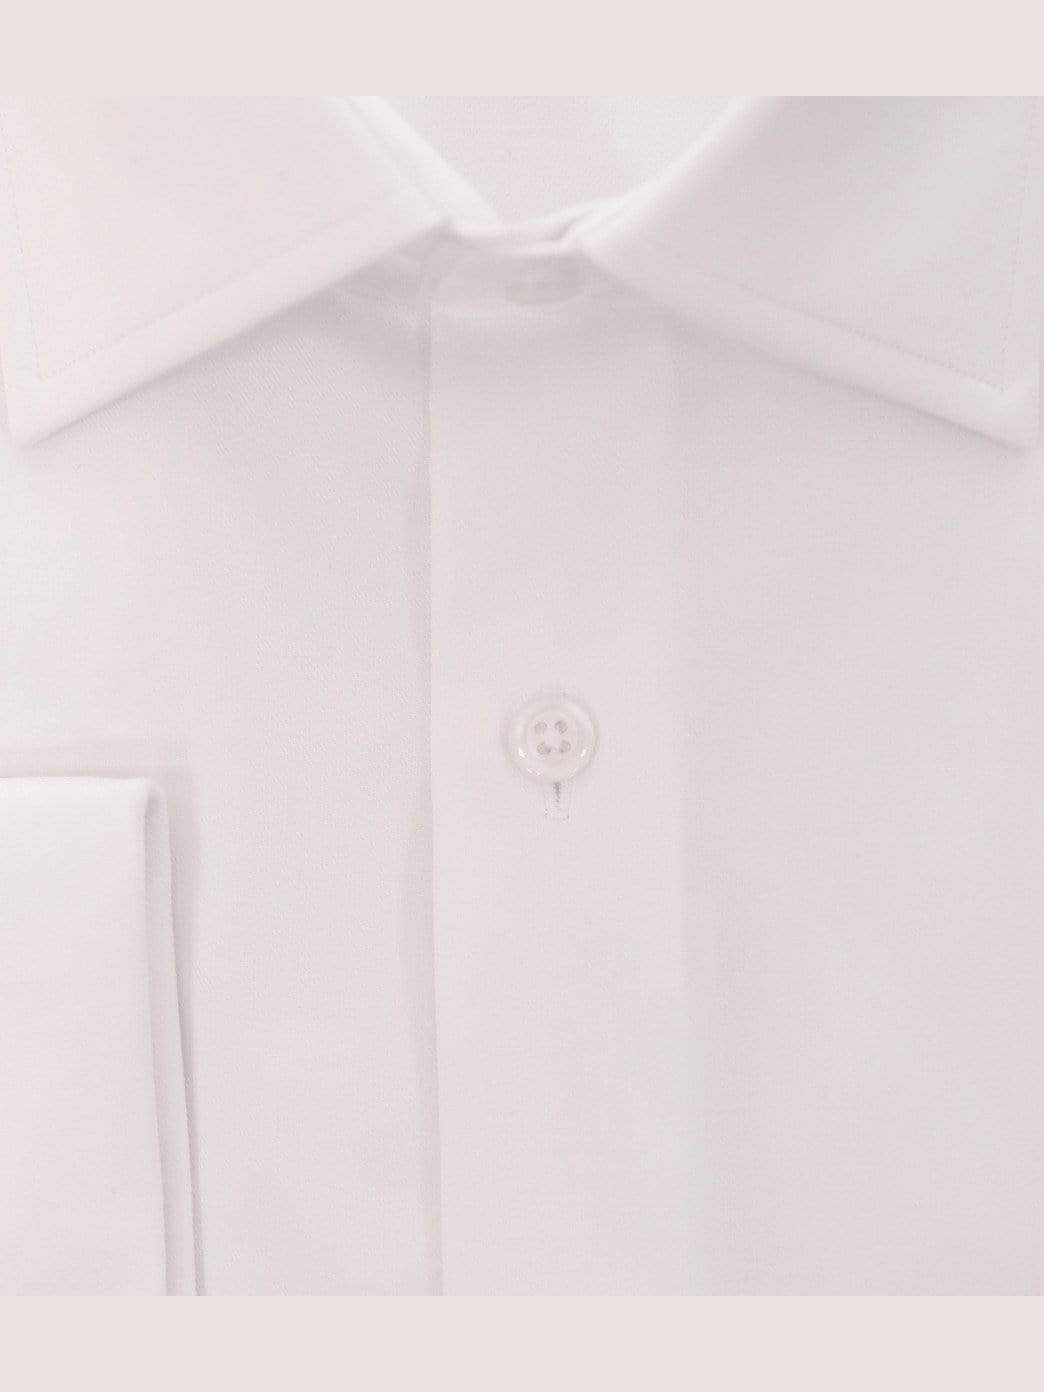 Christopher Lena Bestselling Items Mens Classic Fit White 2 Ply Cotton Wrinkle Free French Cuff Dress Shirt